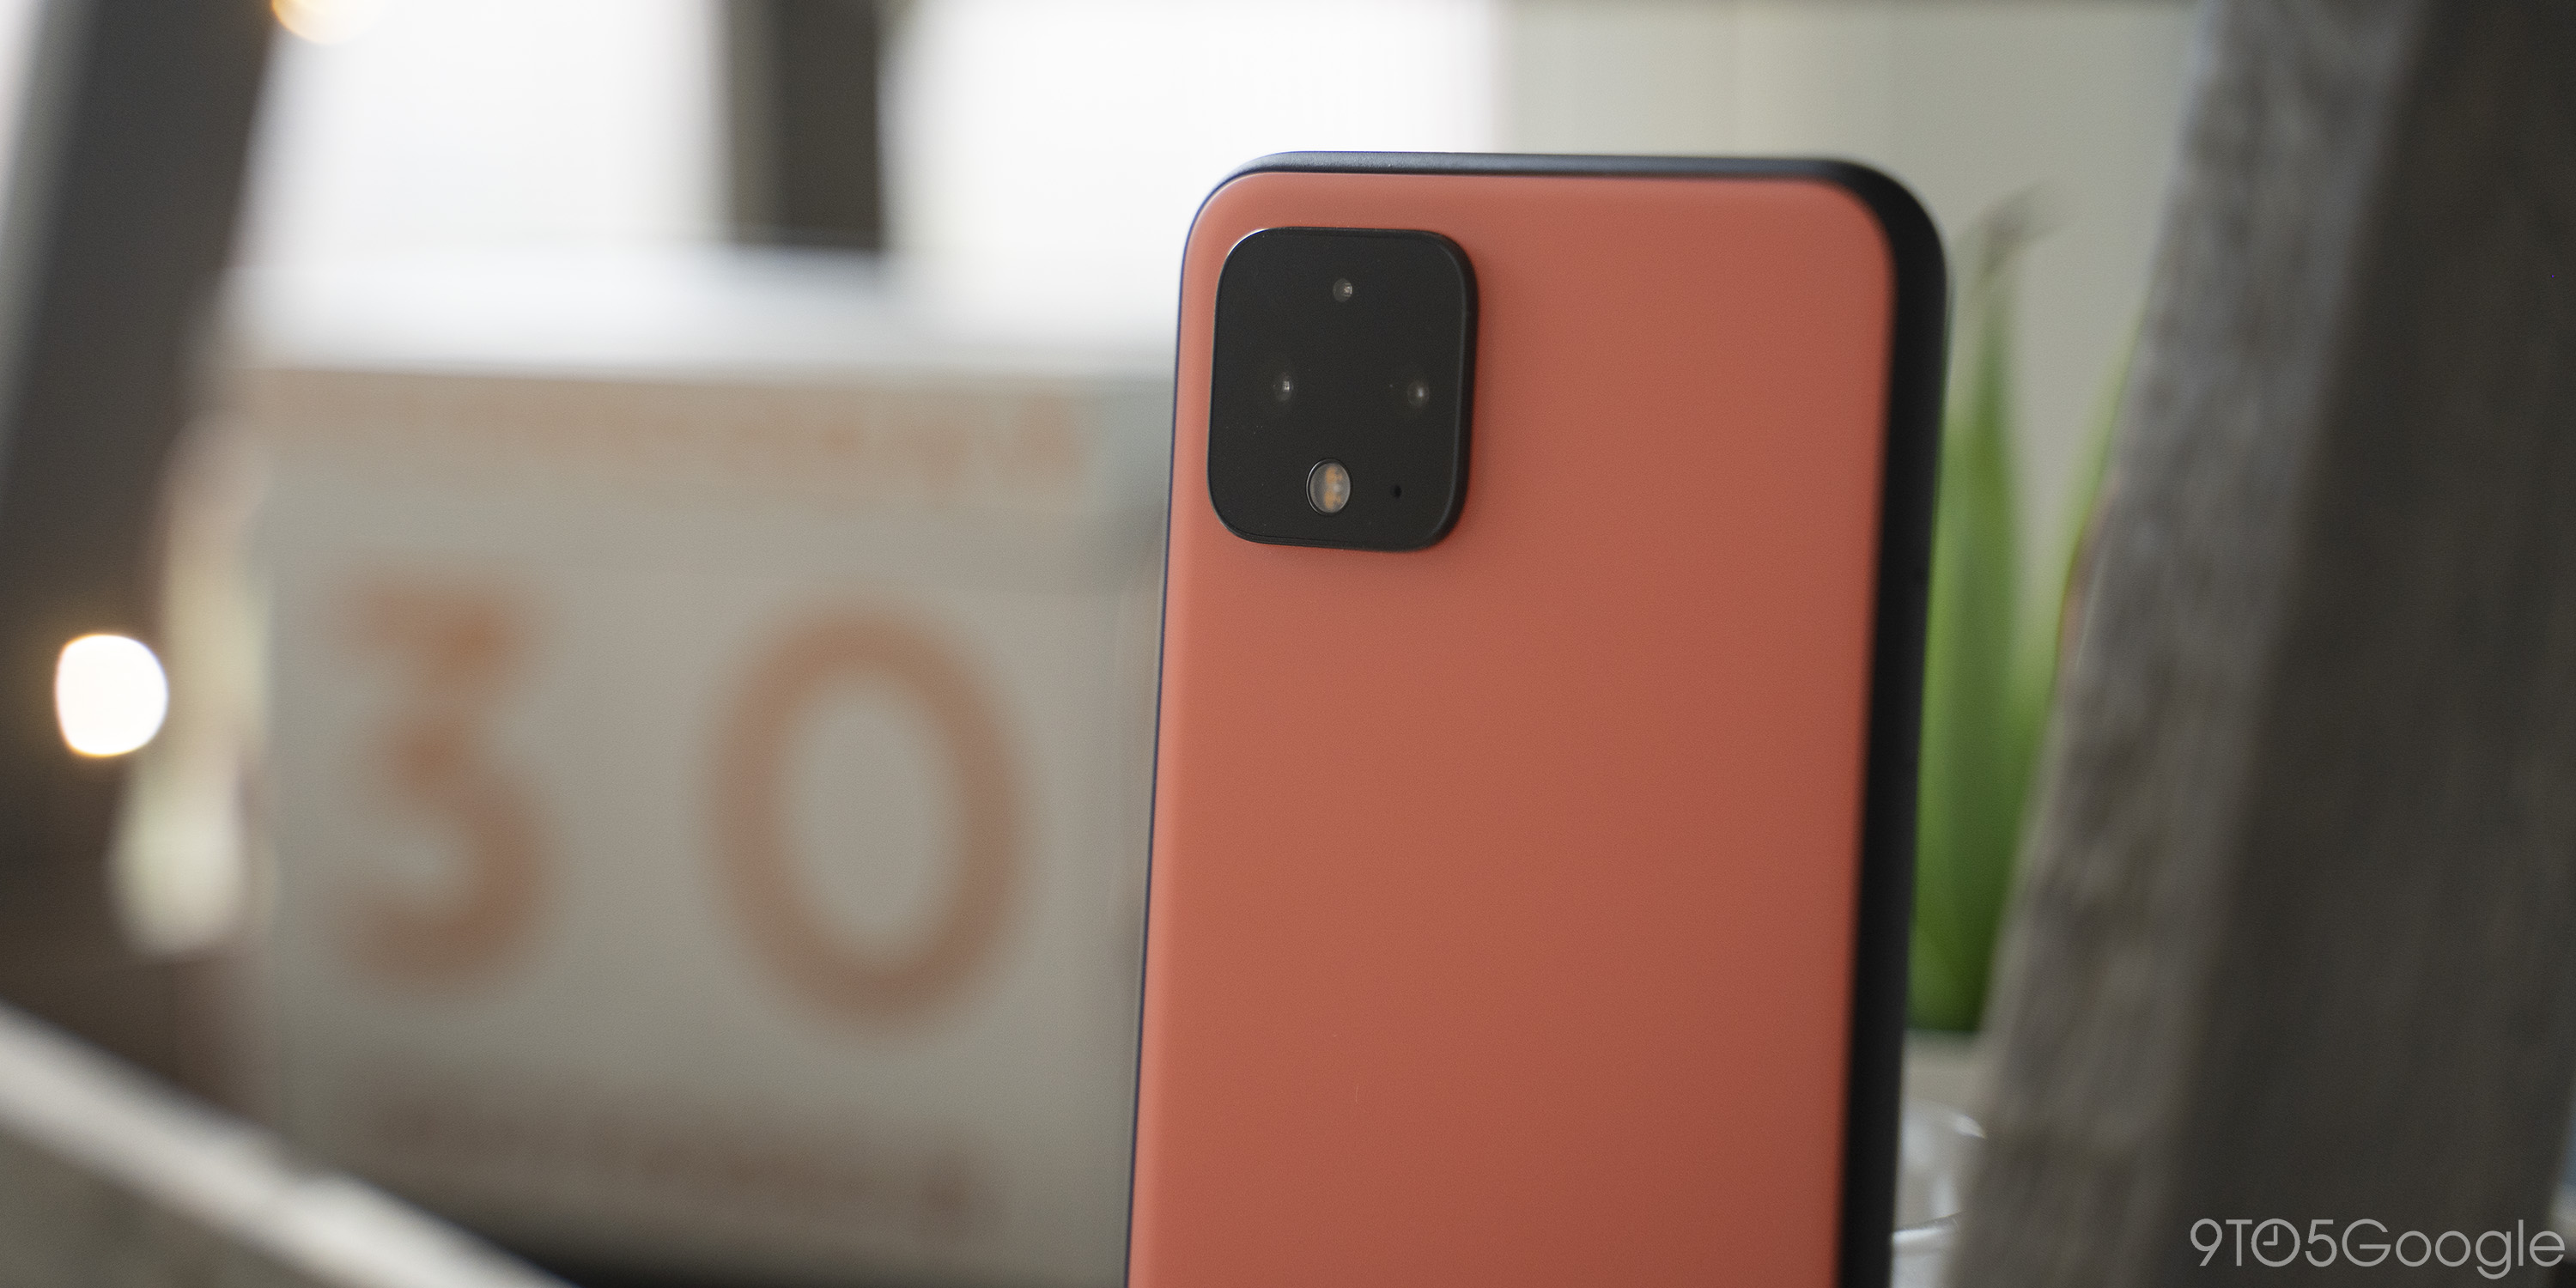 Google Pixel 4 Review: Truly stellar Android experience - 9to5Google